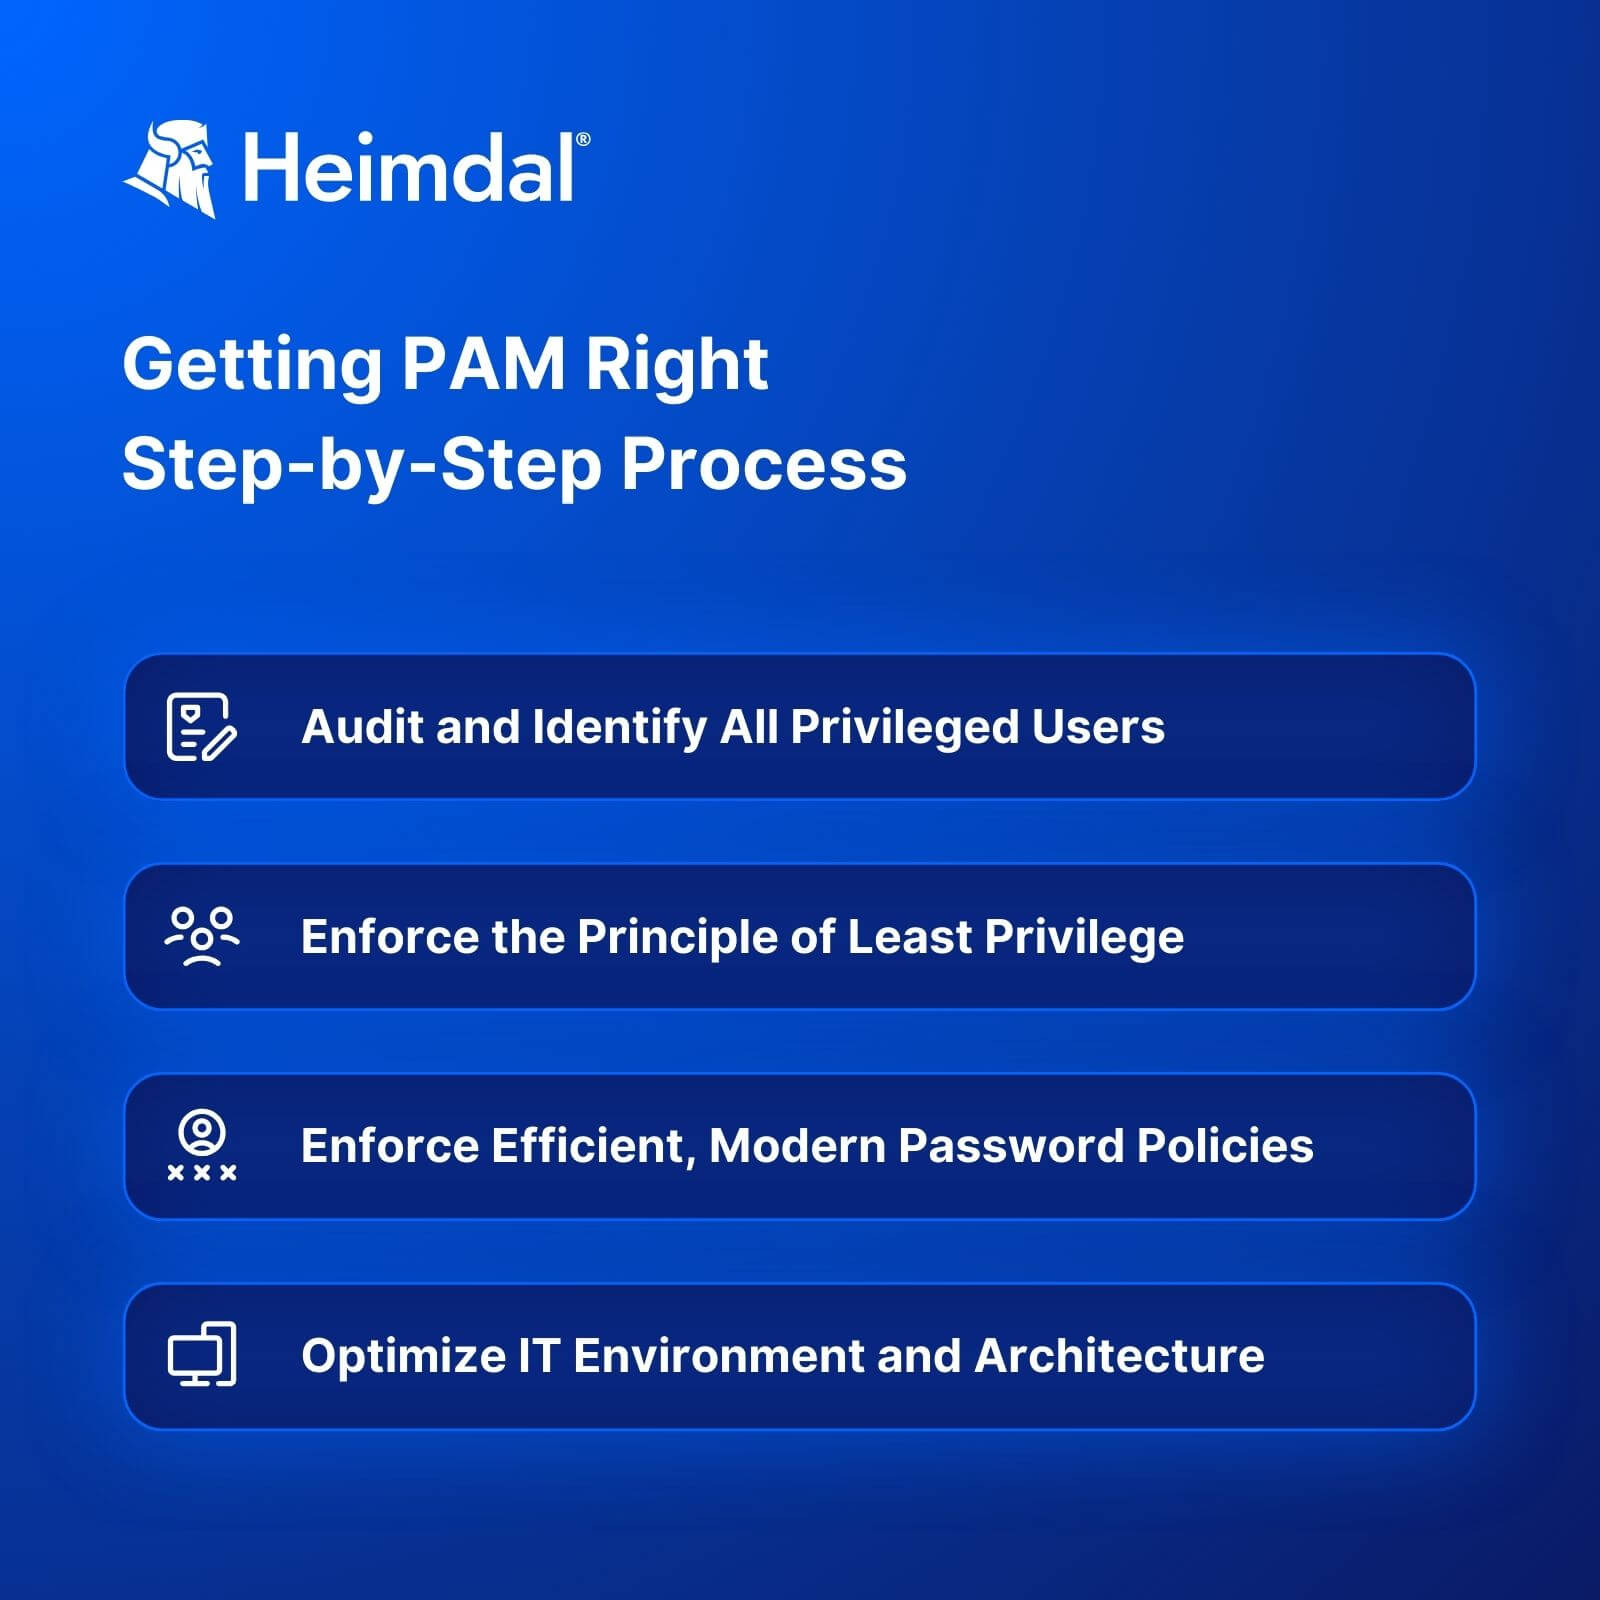 a step-by-step guide listing all the processes necessary for a company to implement an effective privileged access management (PAM) strategy